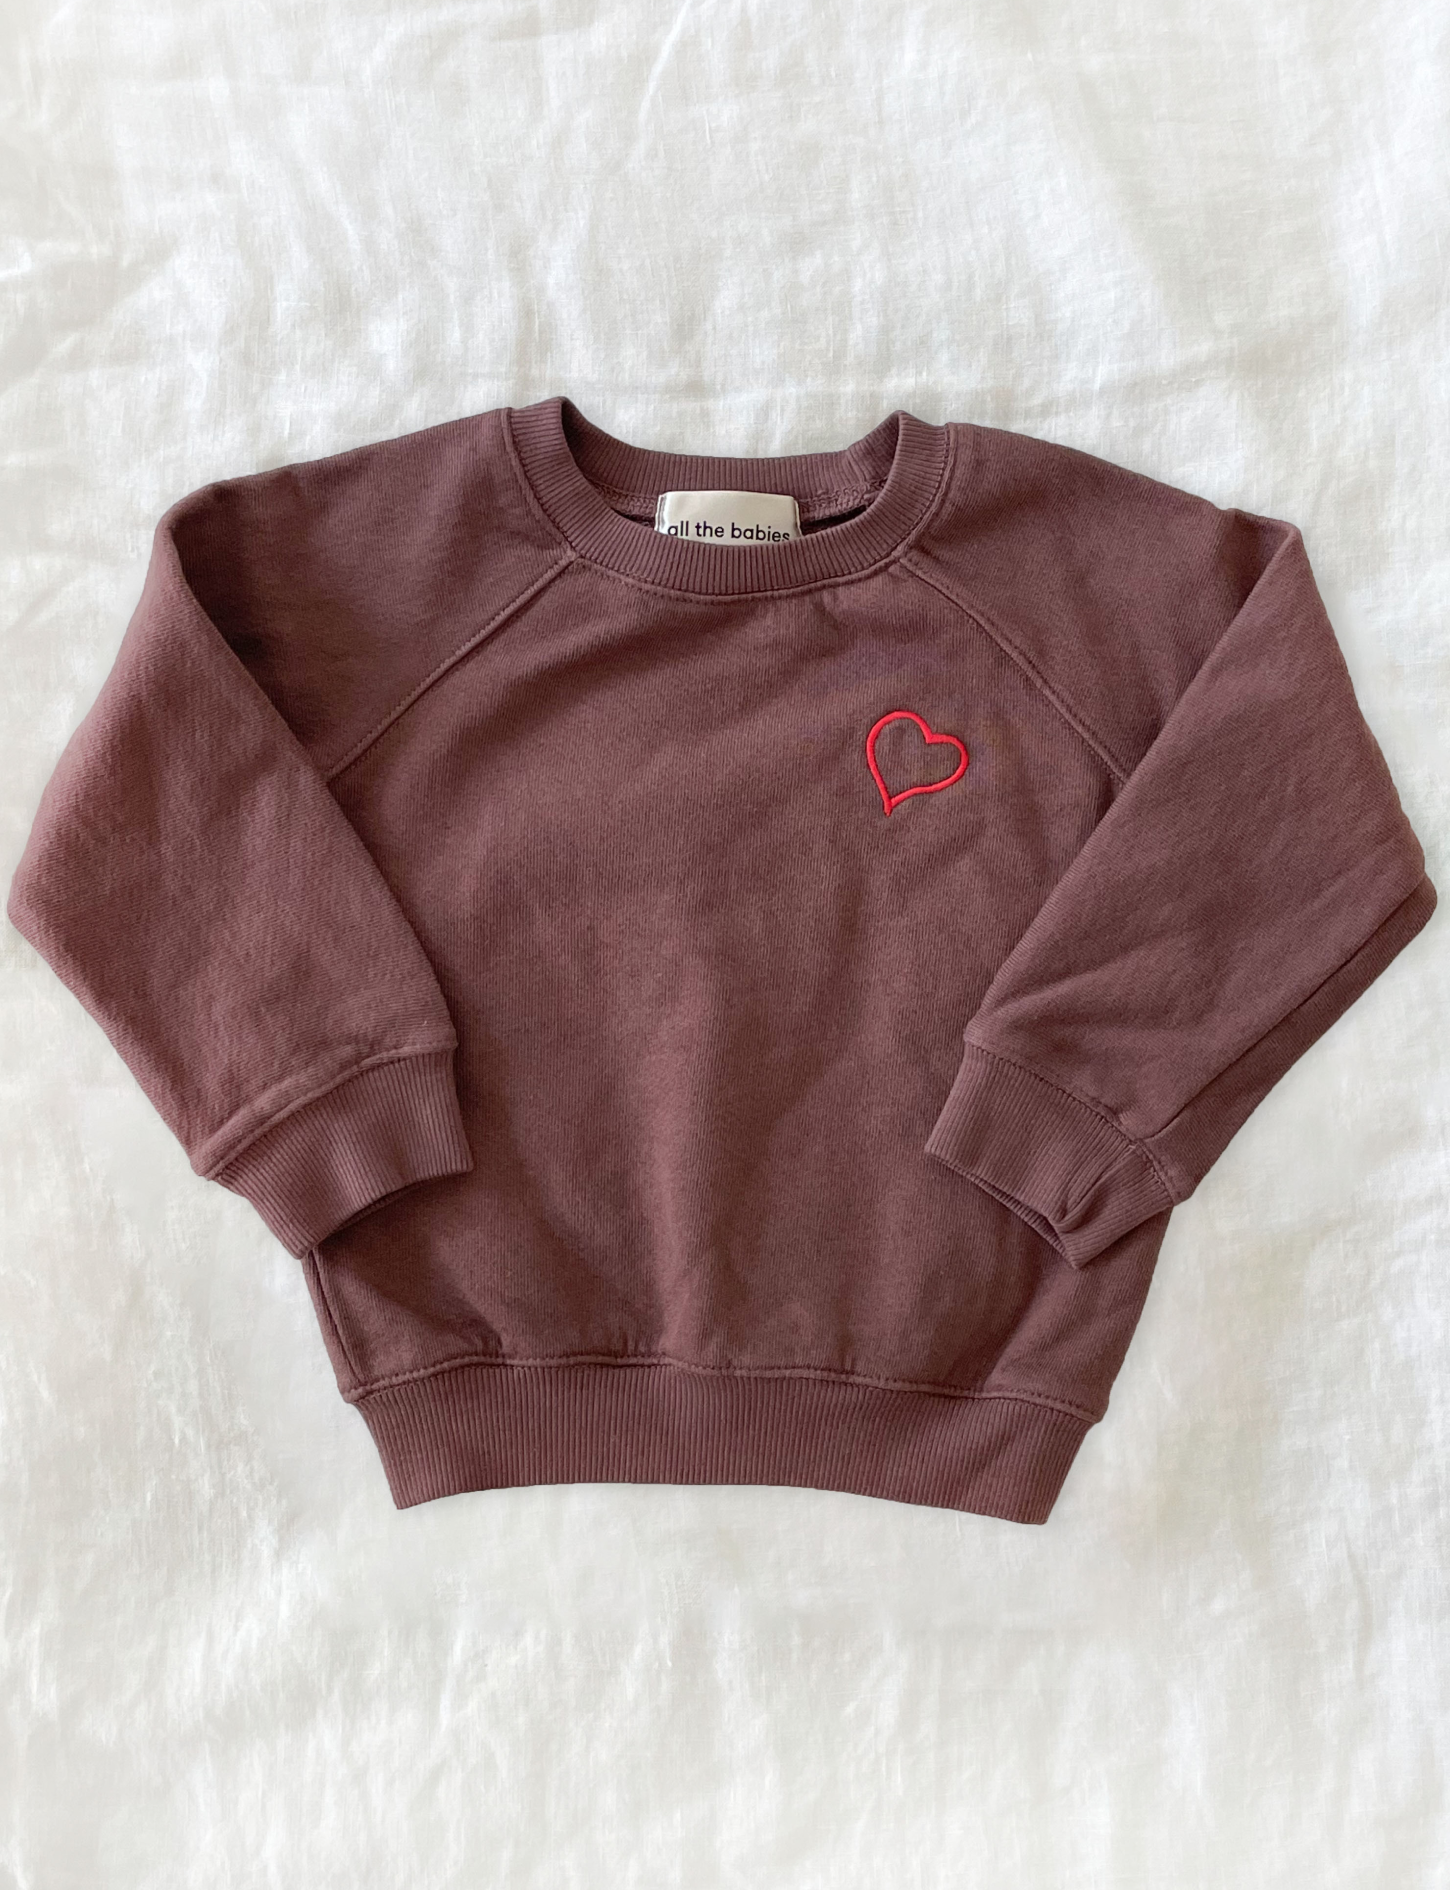 embroidered heart crewneck baby